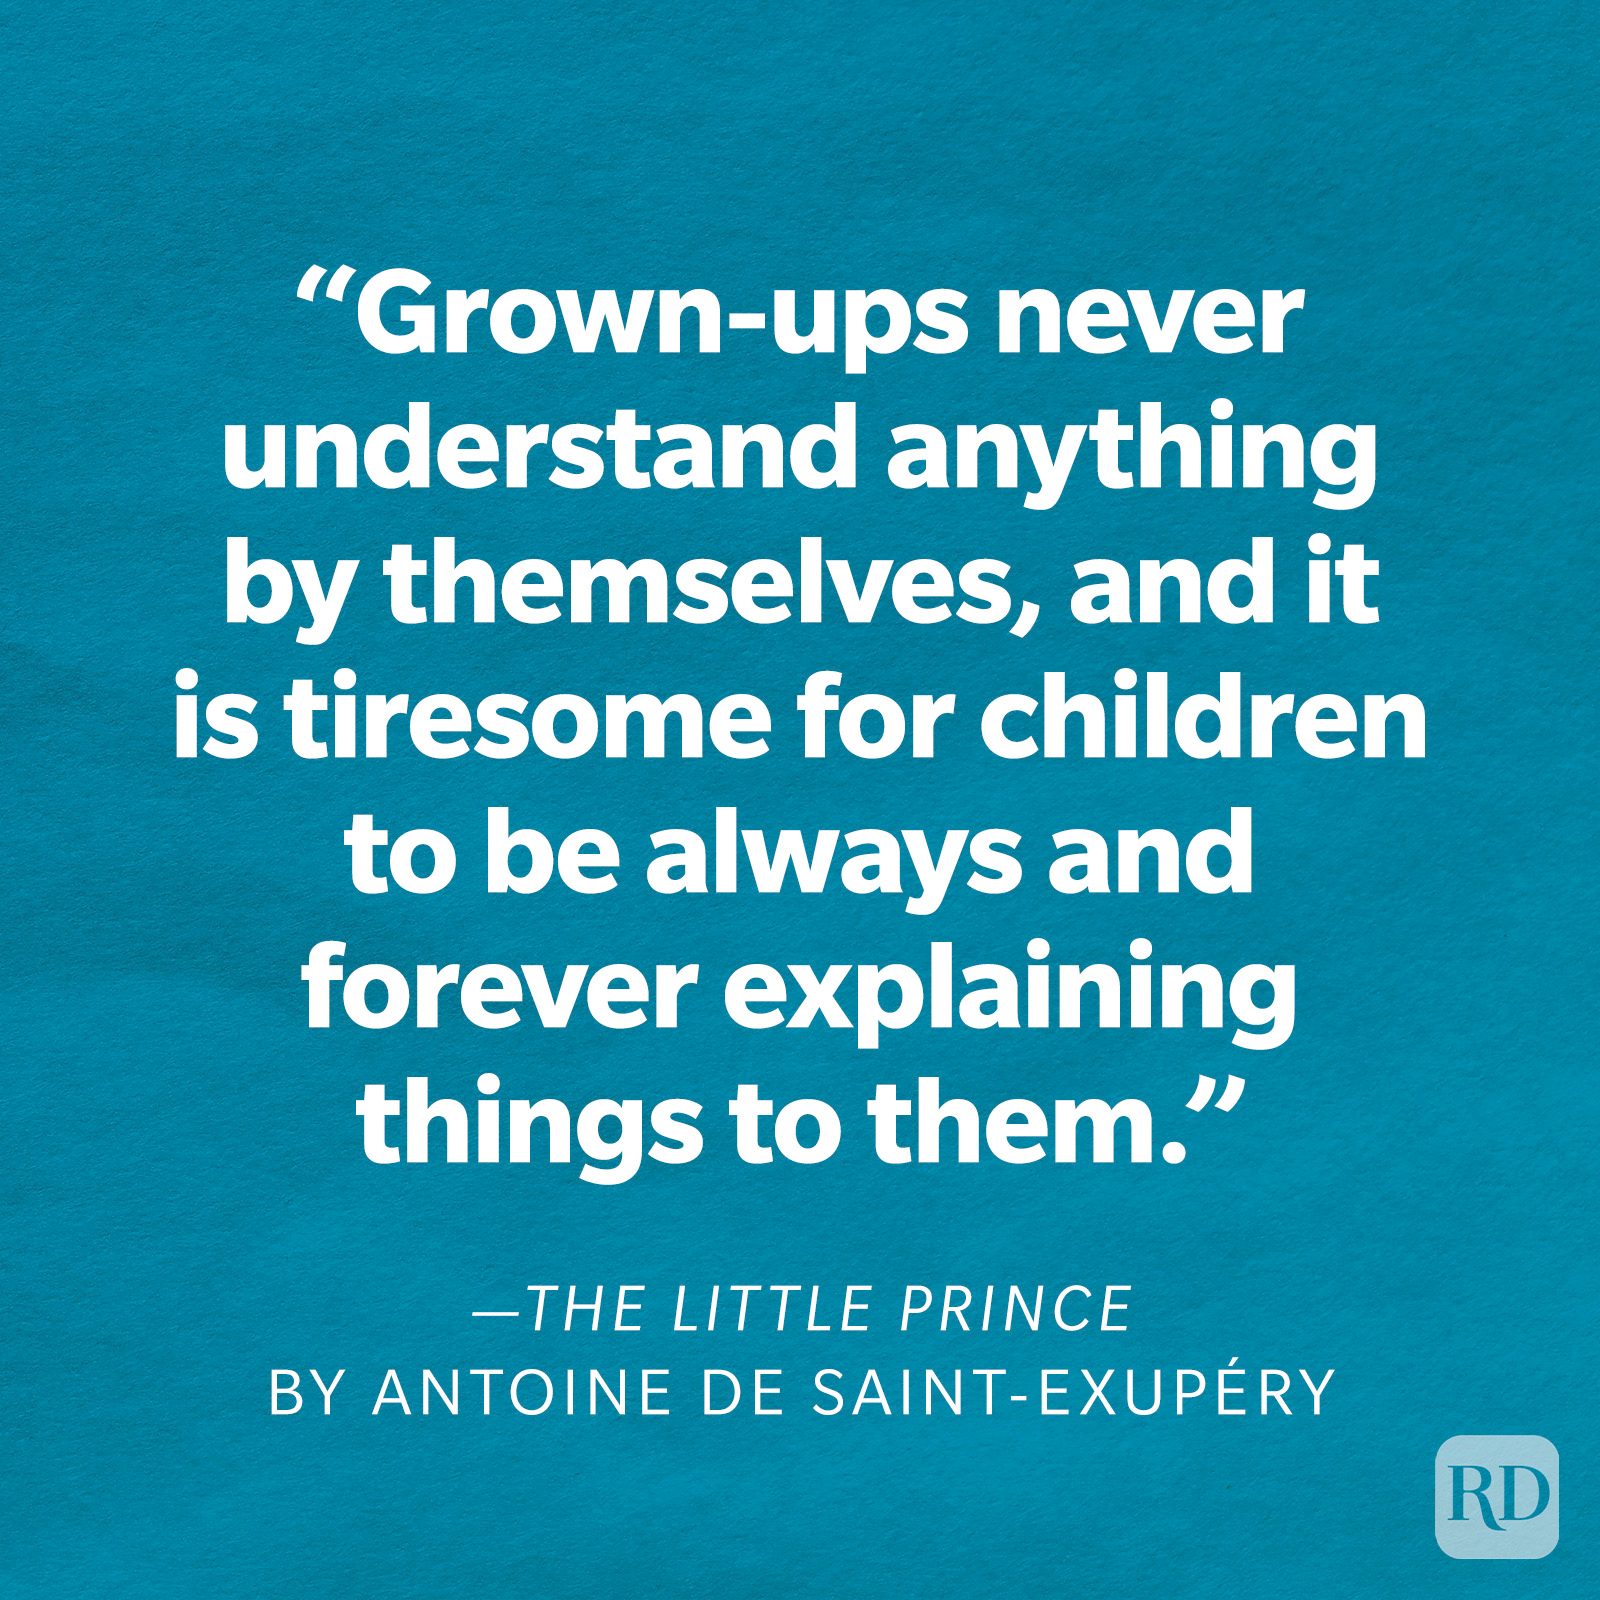 The Little Prince by Antoine de Saint-Exupéry "Grown-ups never understand anything by themselves, and it is tiresome for children to be always and forever explaining things to them."